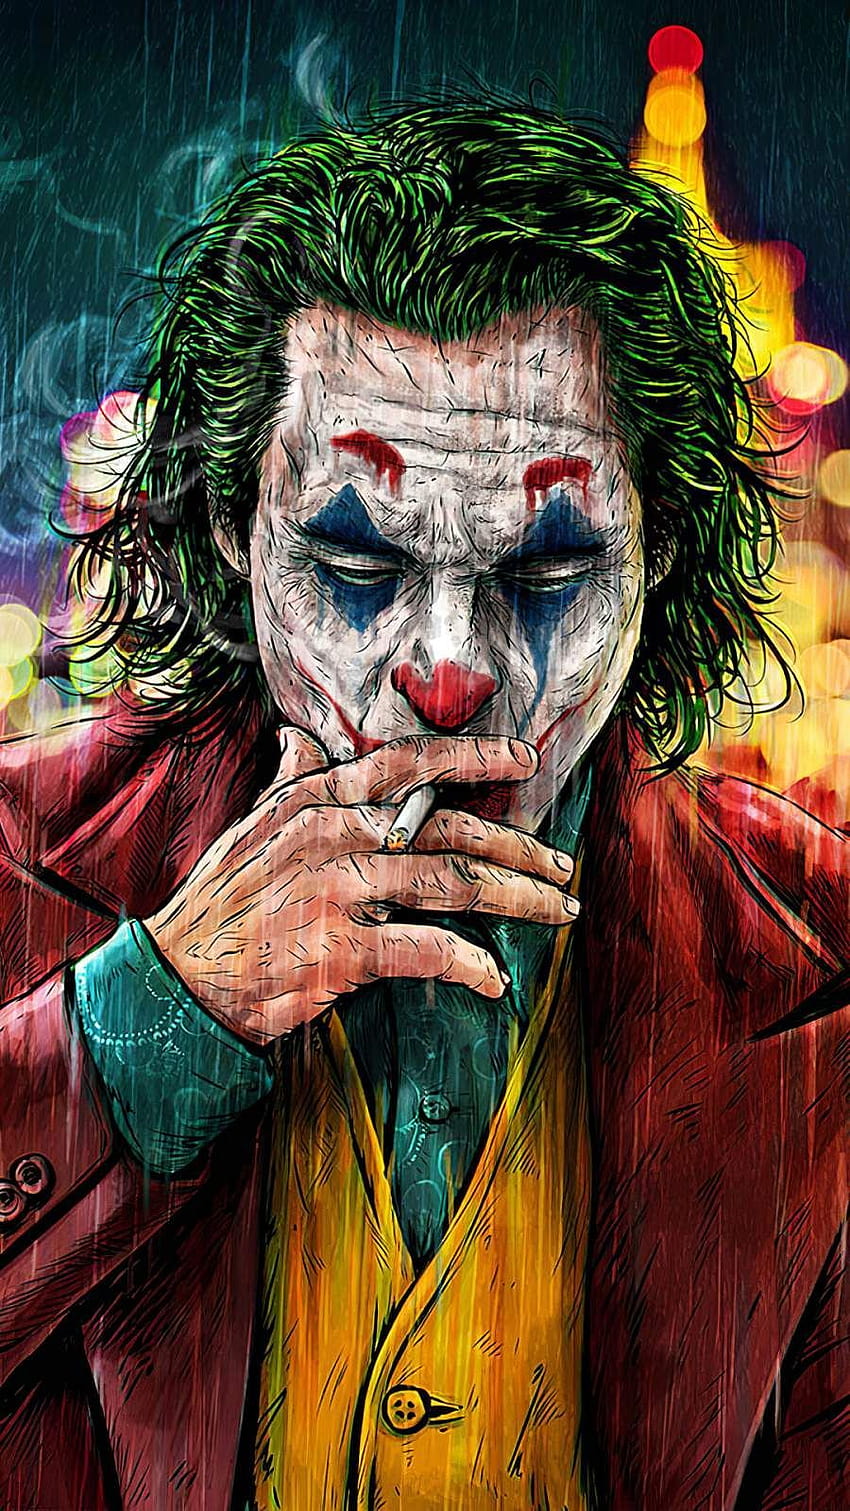 iPhone for iPhone 8, iPhone 8 Plus, iPhone 6s, iPhone 6s Plus, iPhone X and iPod Touch High Quali… in 2020, joker 2020 iphone HD phone wallpaper